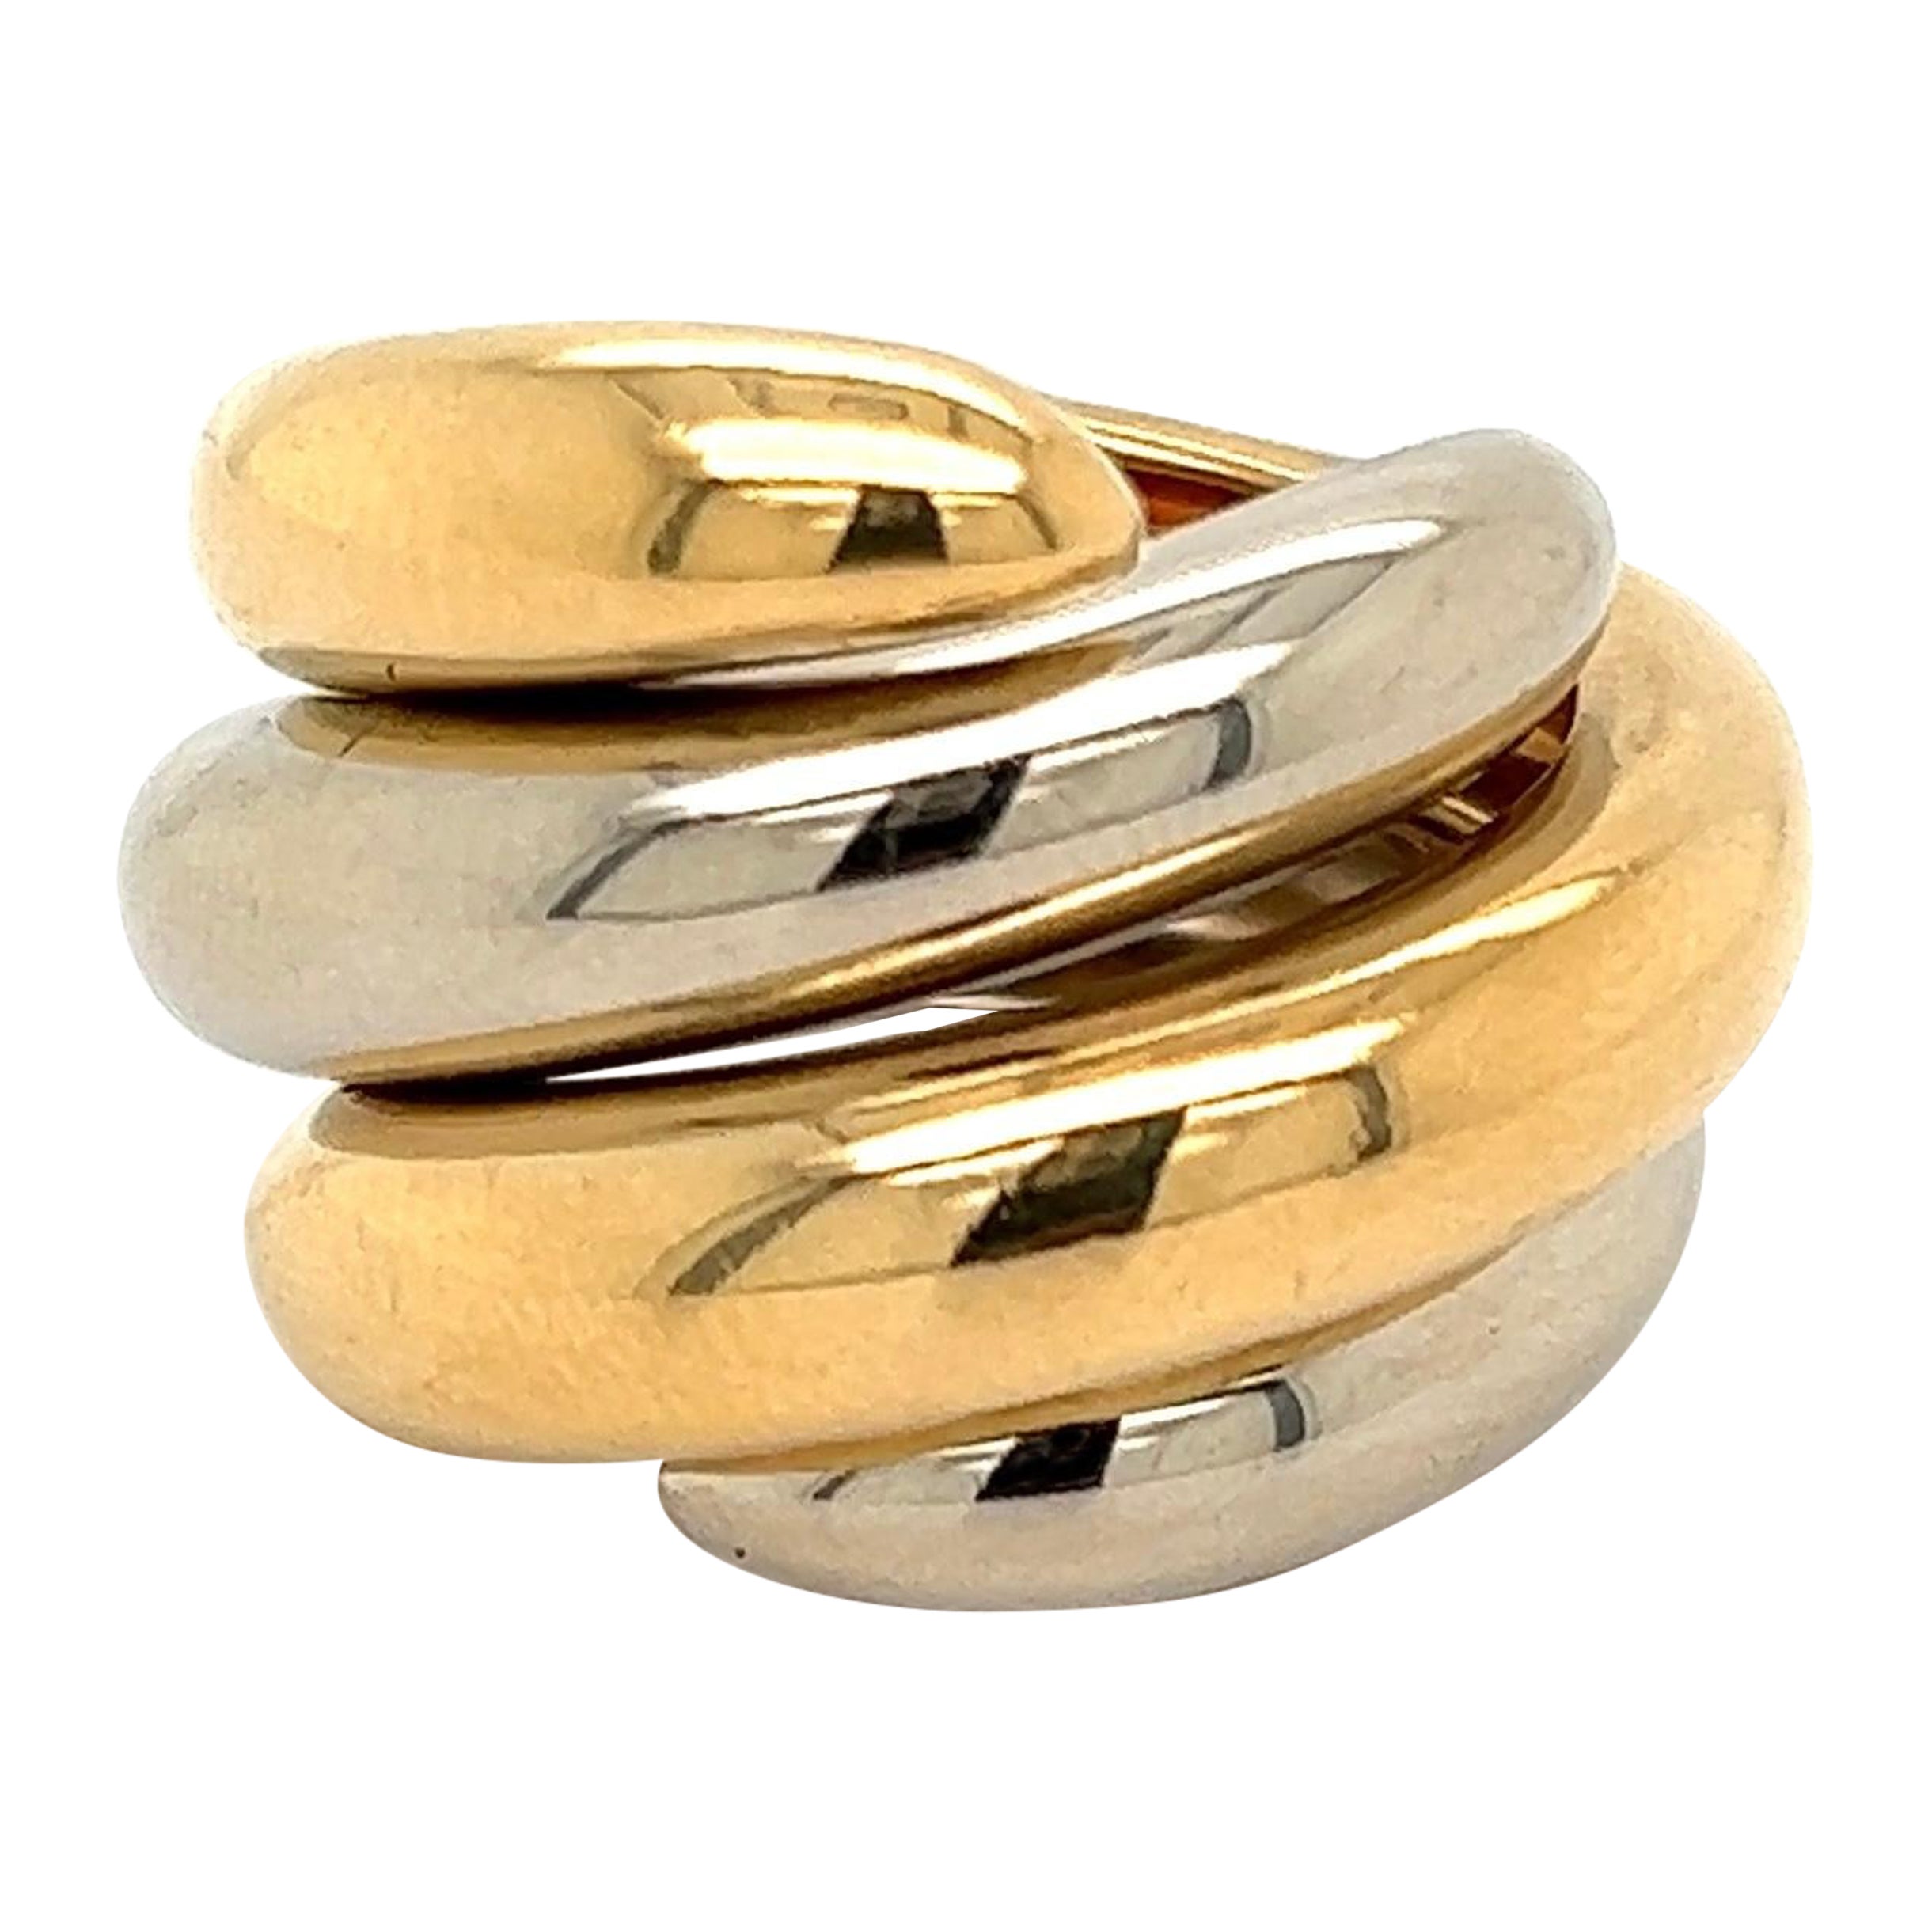 Mid-Century Modern Chaumet France Spiral Gold Band Rings Estate Fine Jewelry